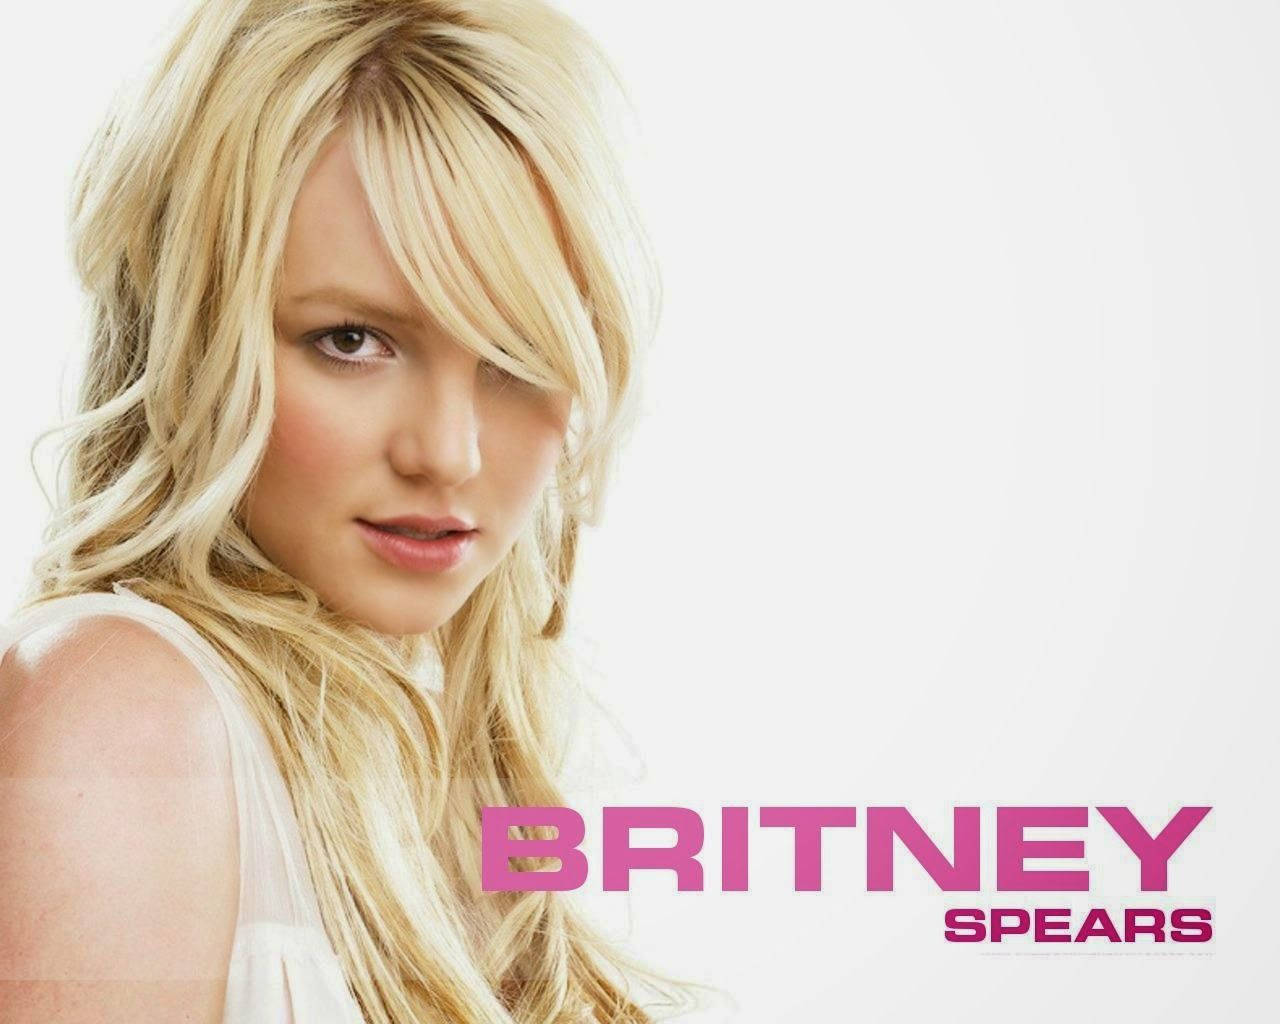 Britney Spears In Pink And White Wallpaper